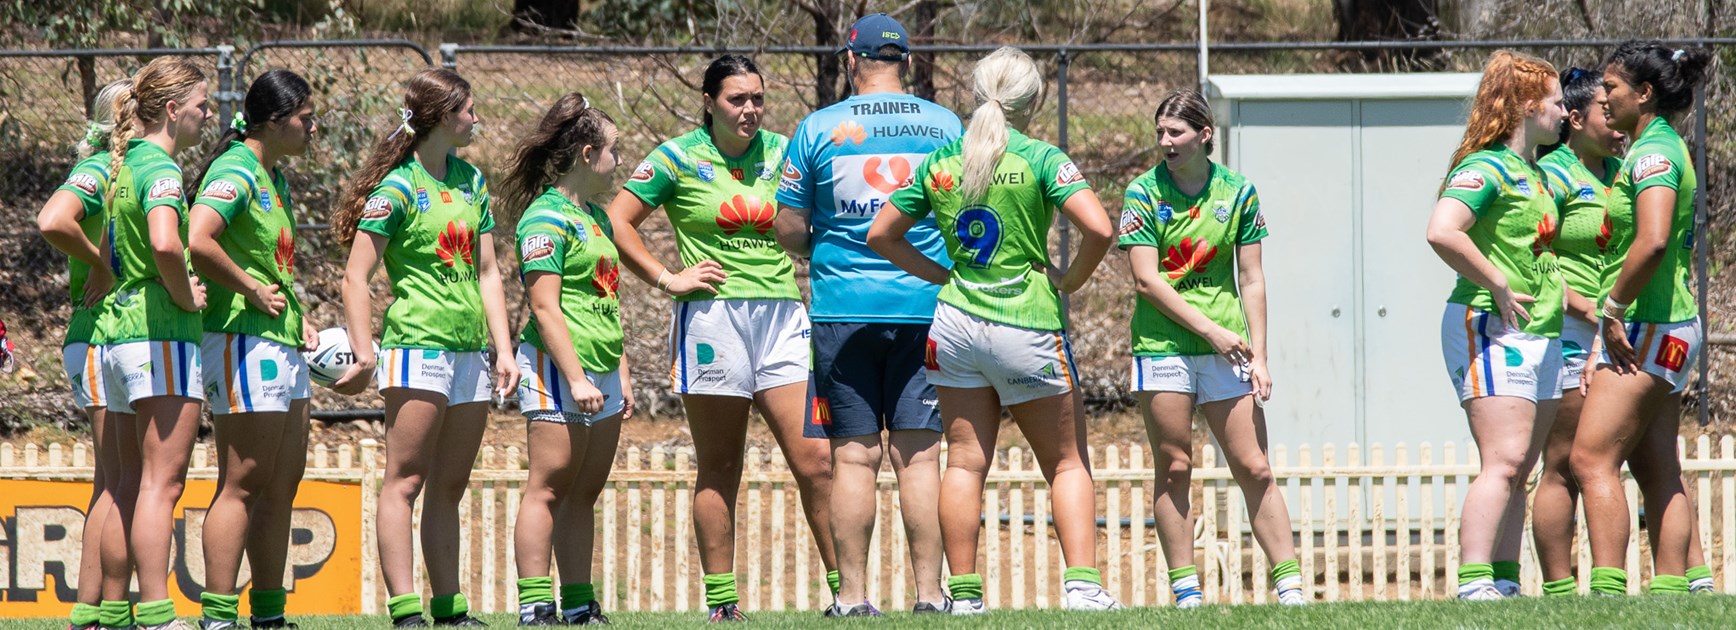 Raiders Foundation looking to the future for women’s rugby league